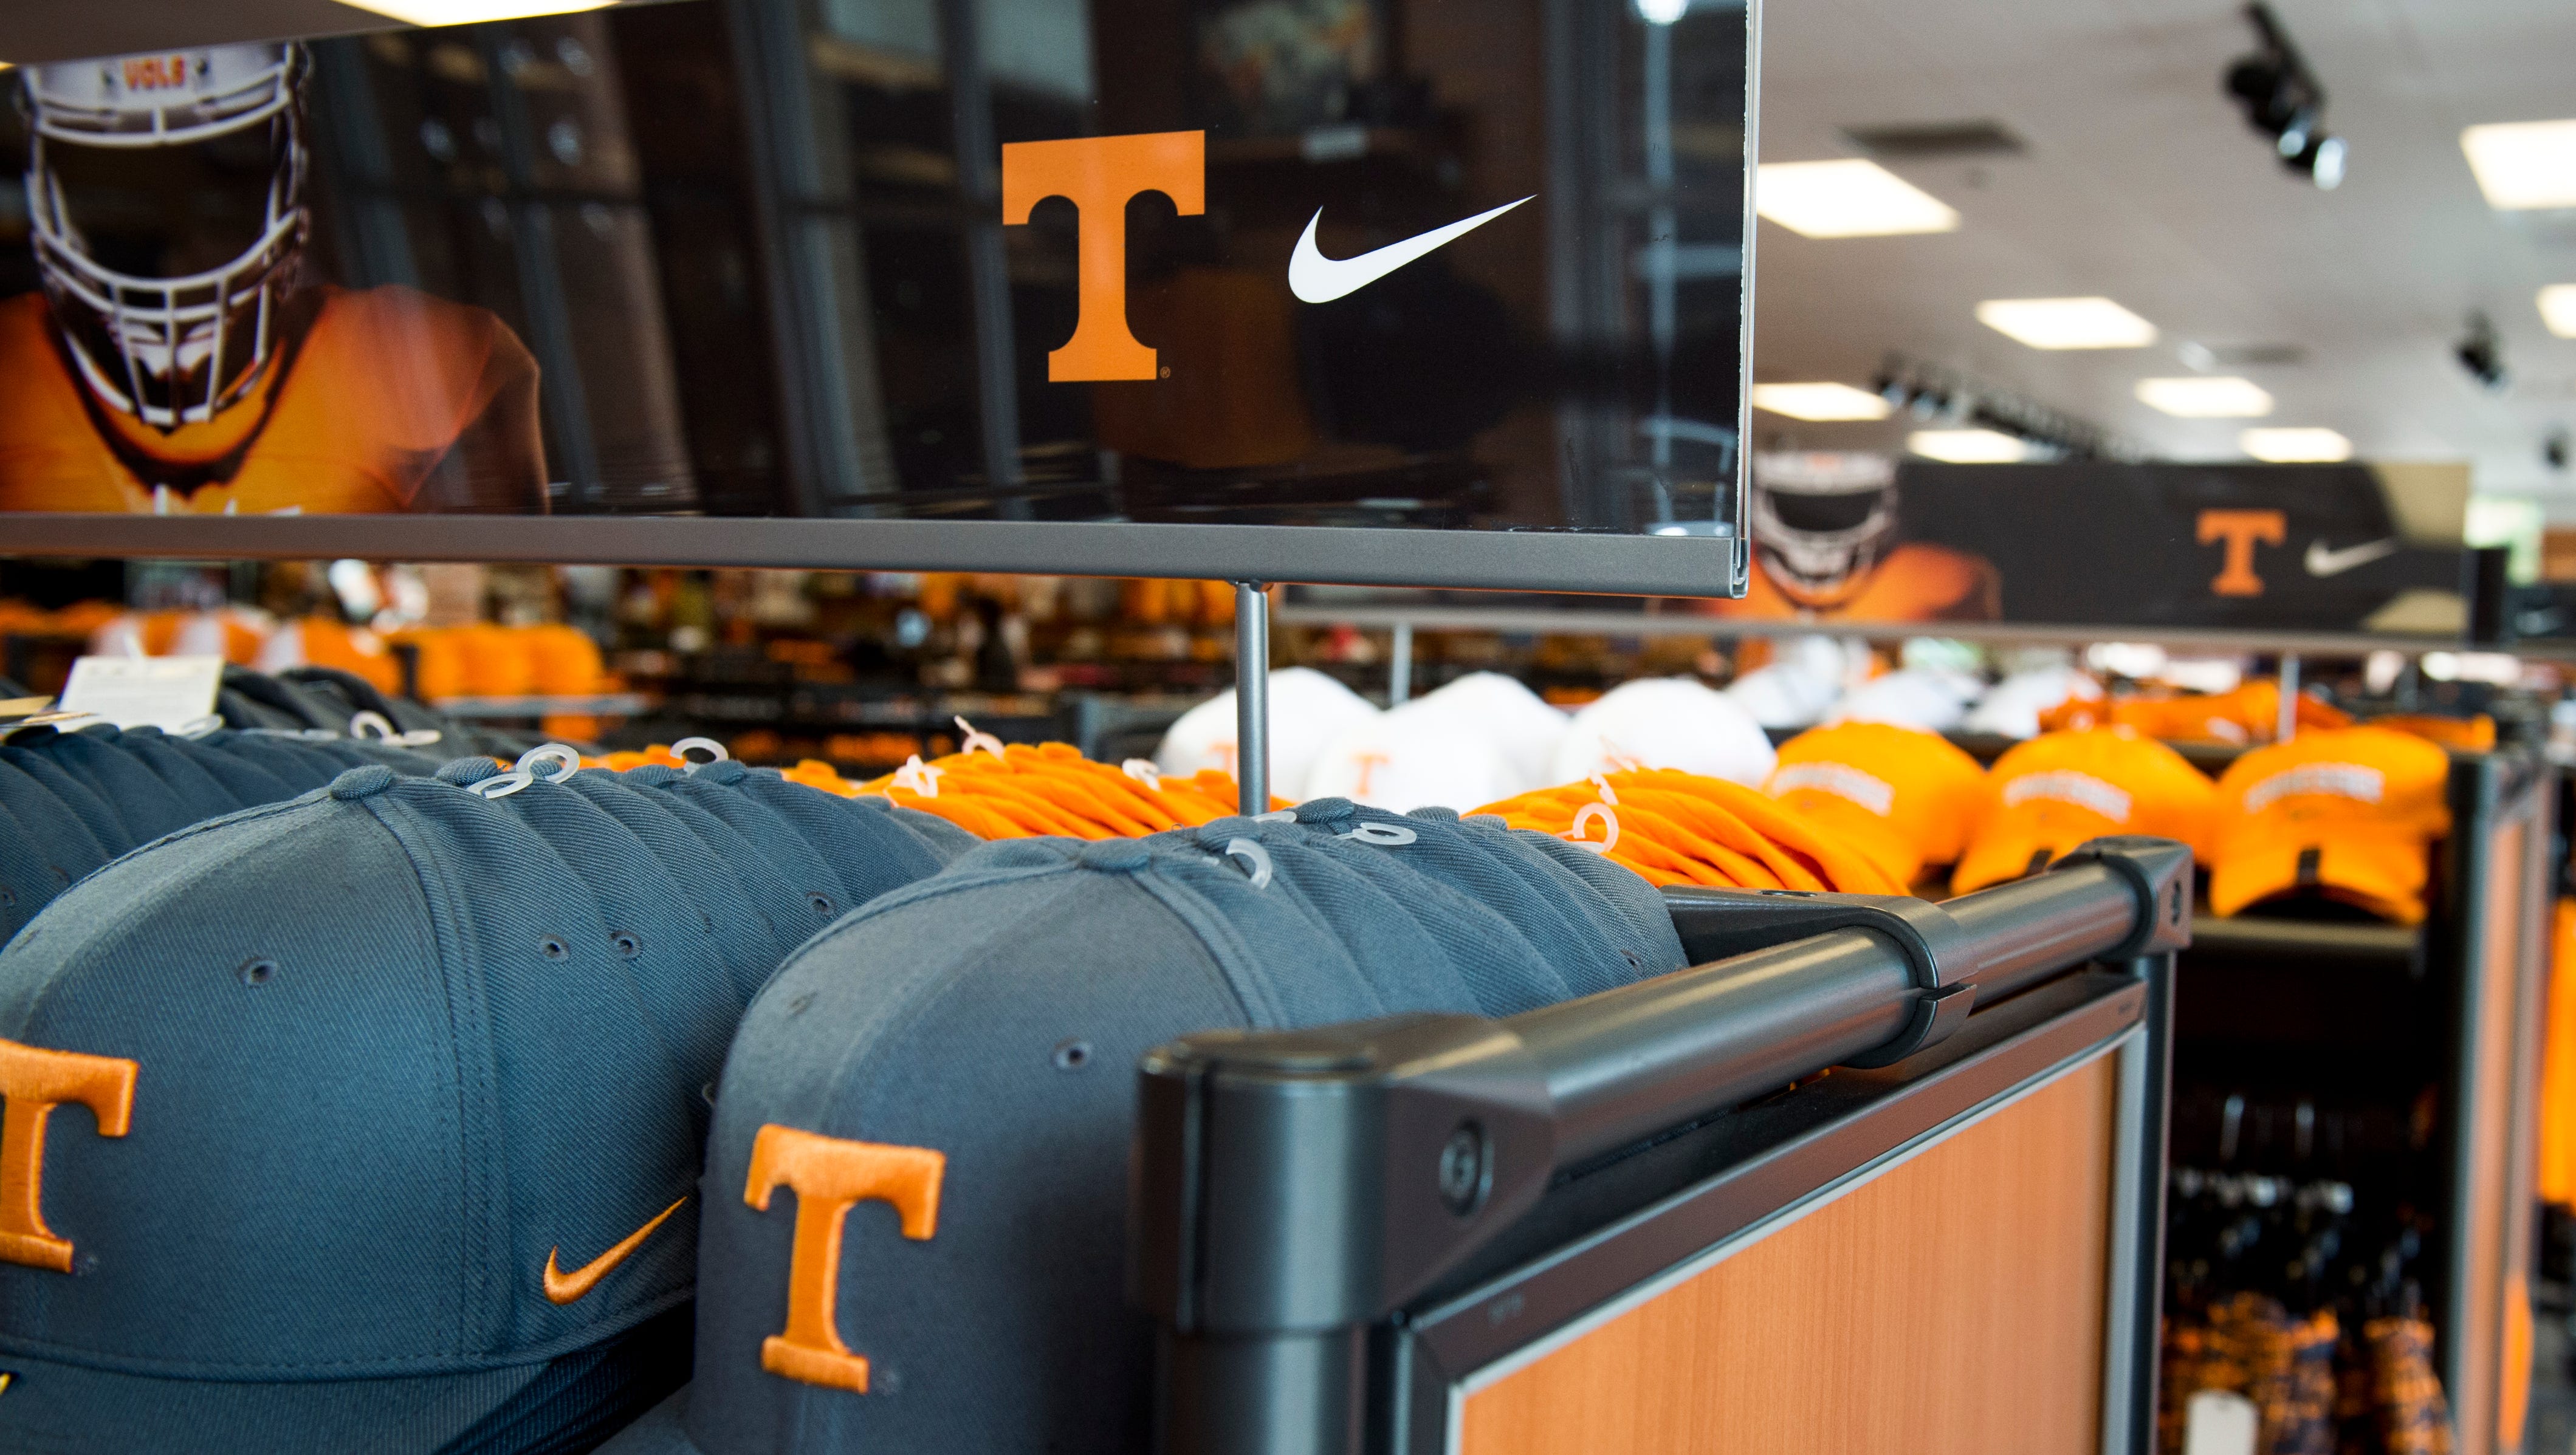 parallel cure Maintenance How much do UT Vols, Vanderbilt, MTSU, Austin Peay, Belmont earn from  apparel contracts?